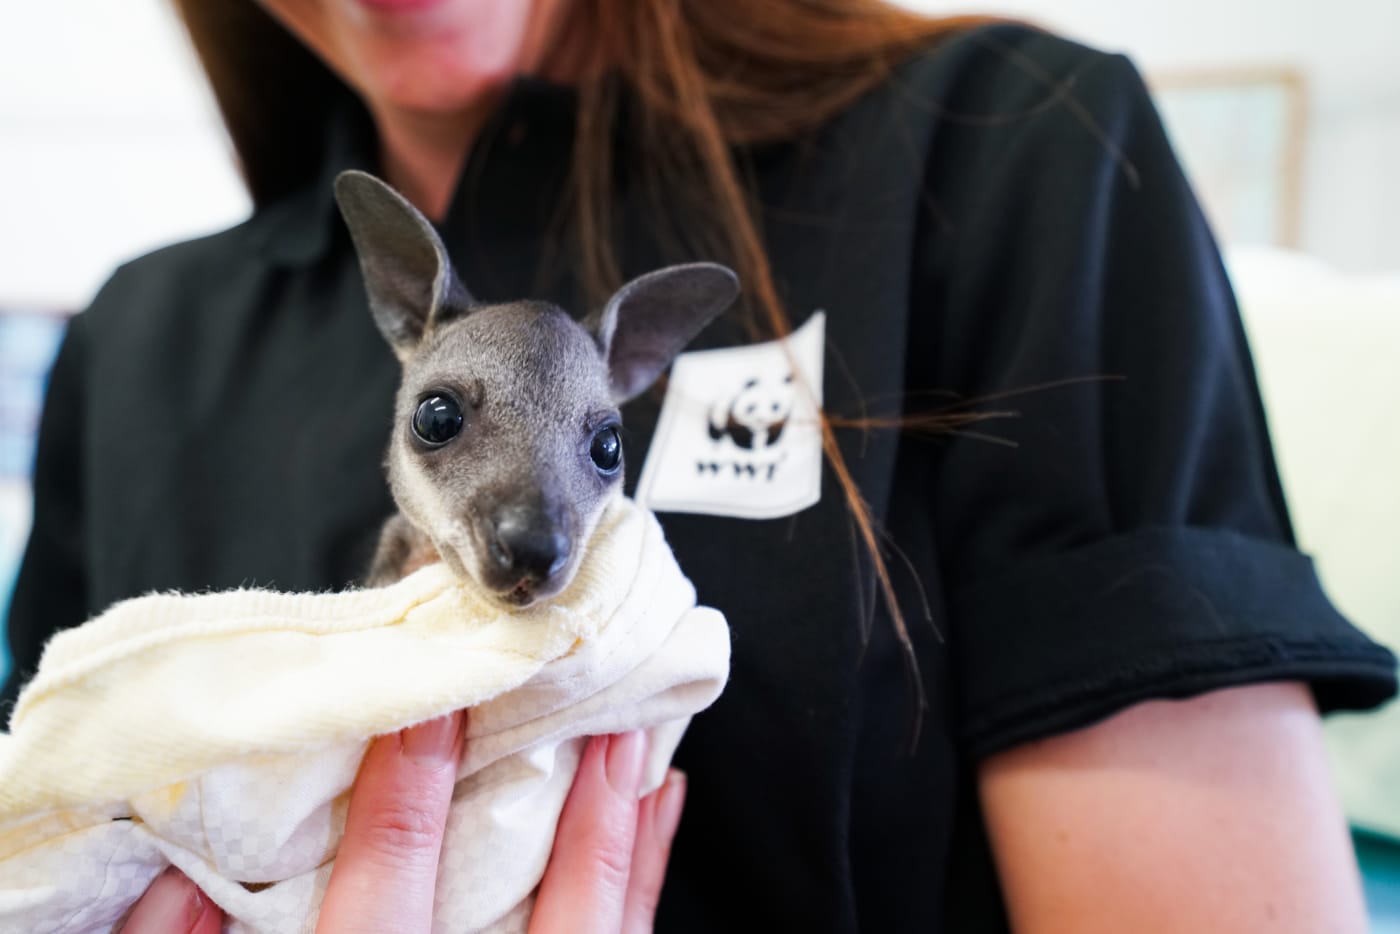 Bushfire-impacted wildlife in care after treatment at Milton Village Vet